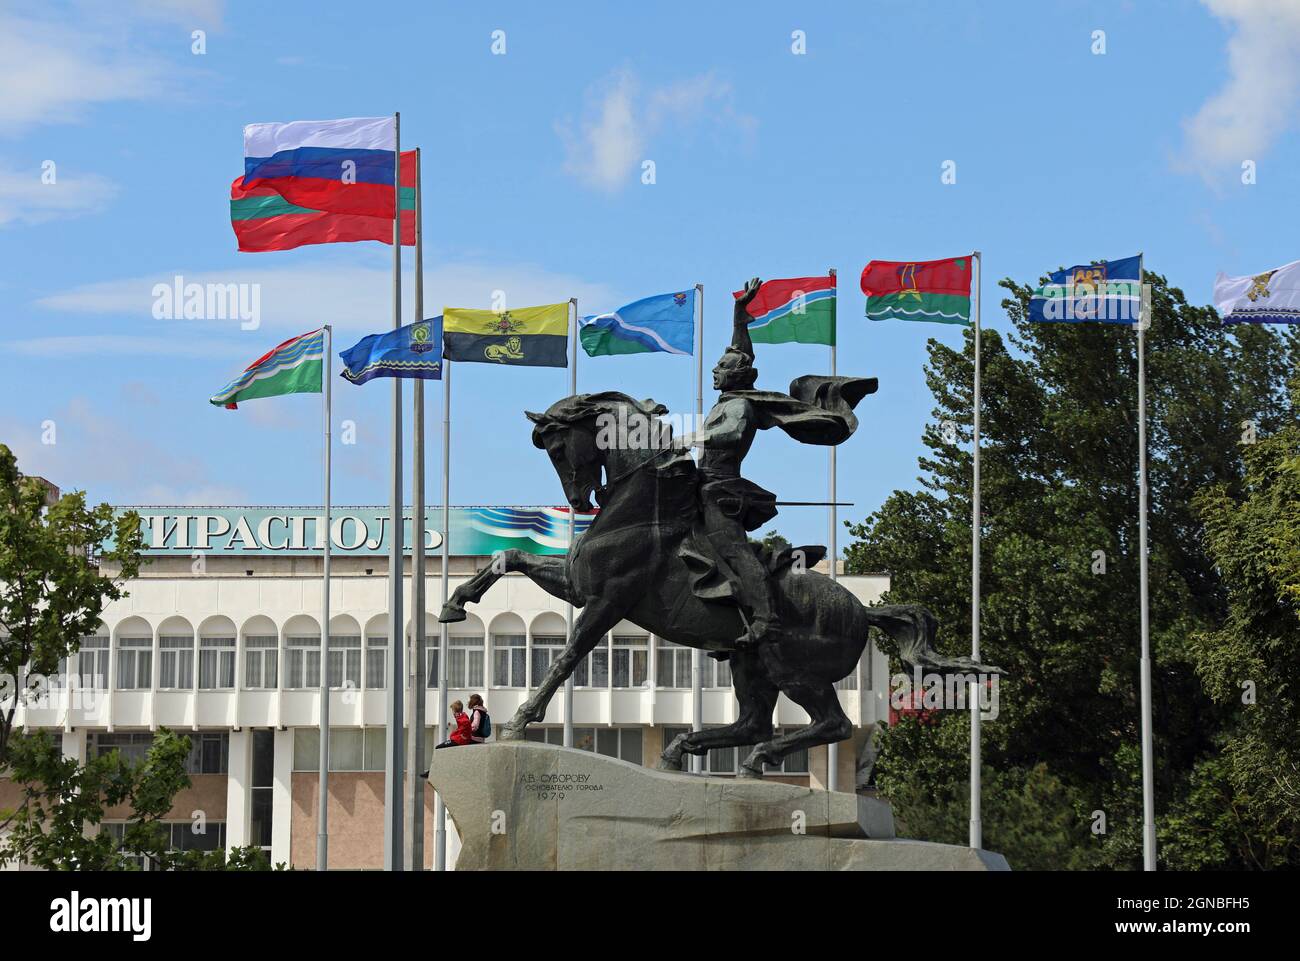 Equestrian statue of Alexander Suvorov on Independence Day in Tiraspol Stock Photo